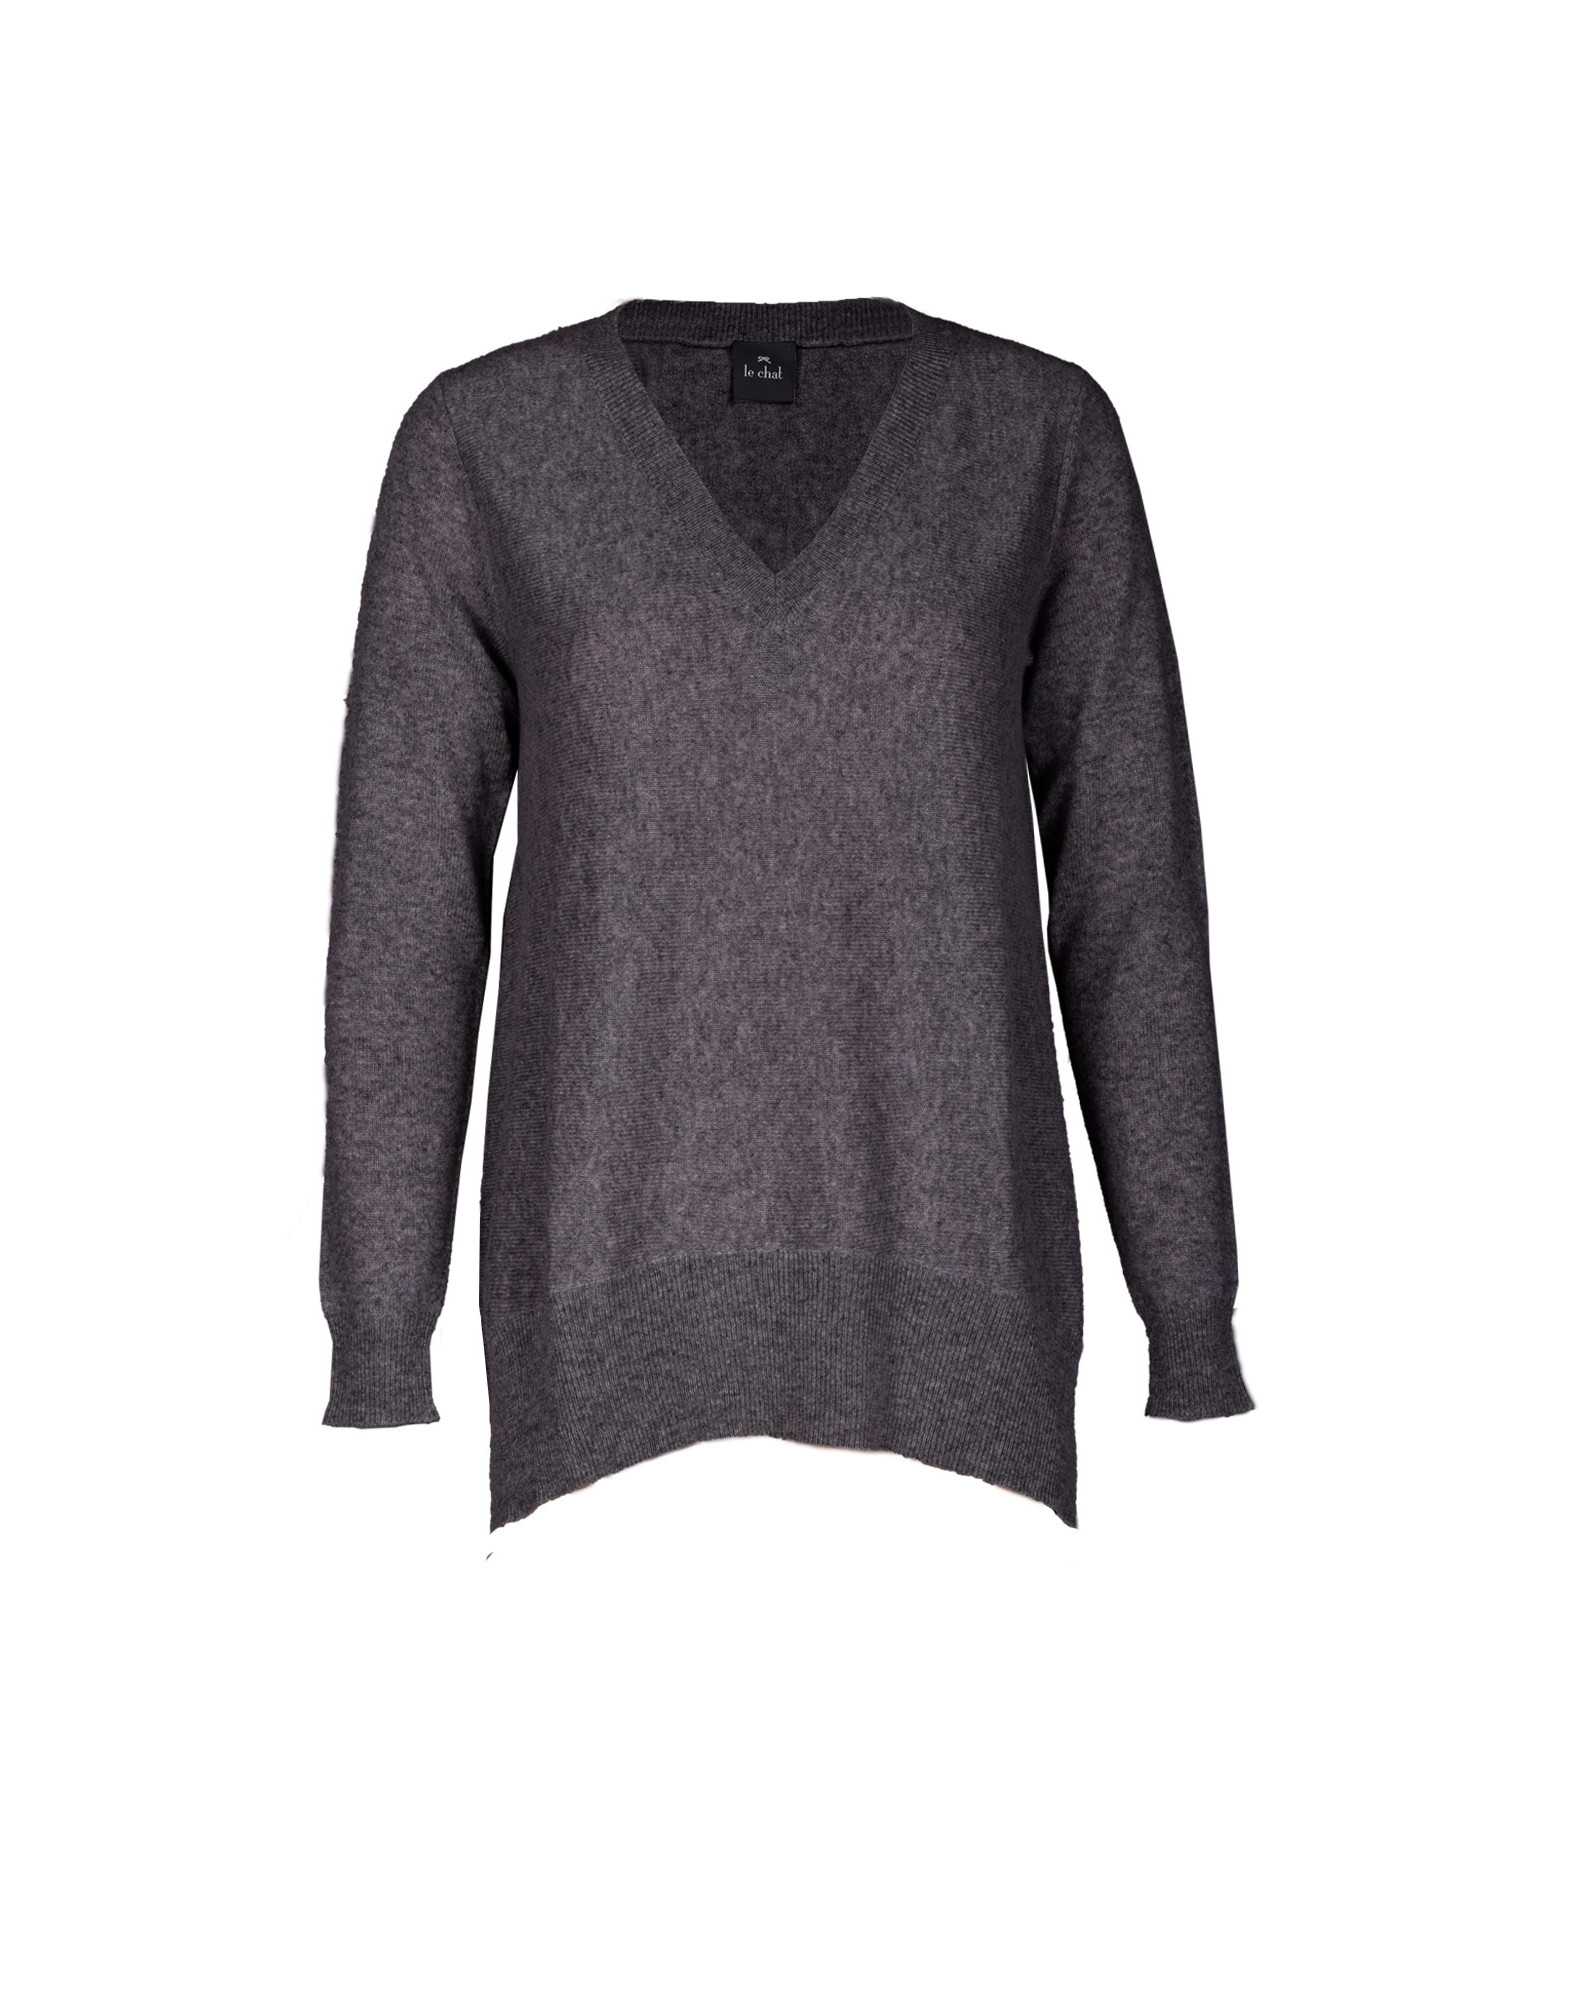 Pull Femme 100% Cachemire Oversize Gris Anthracite